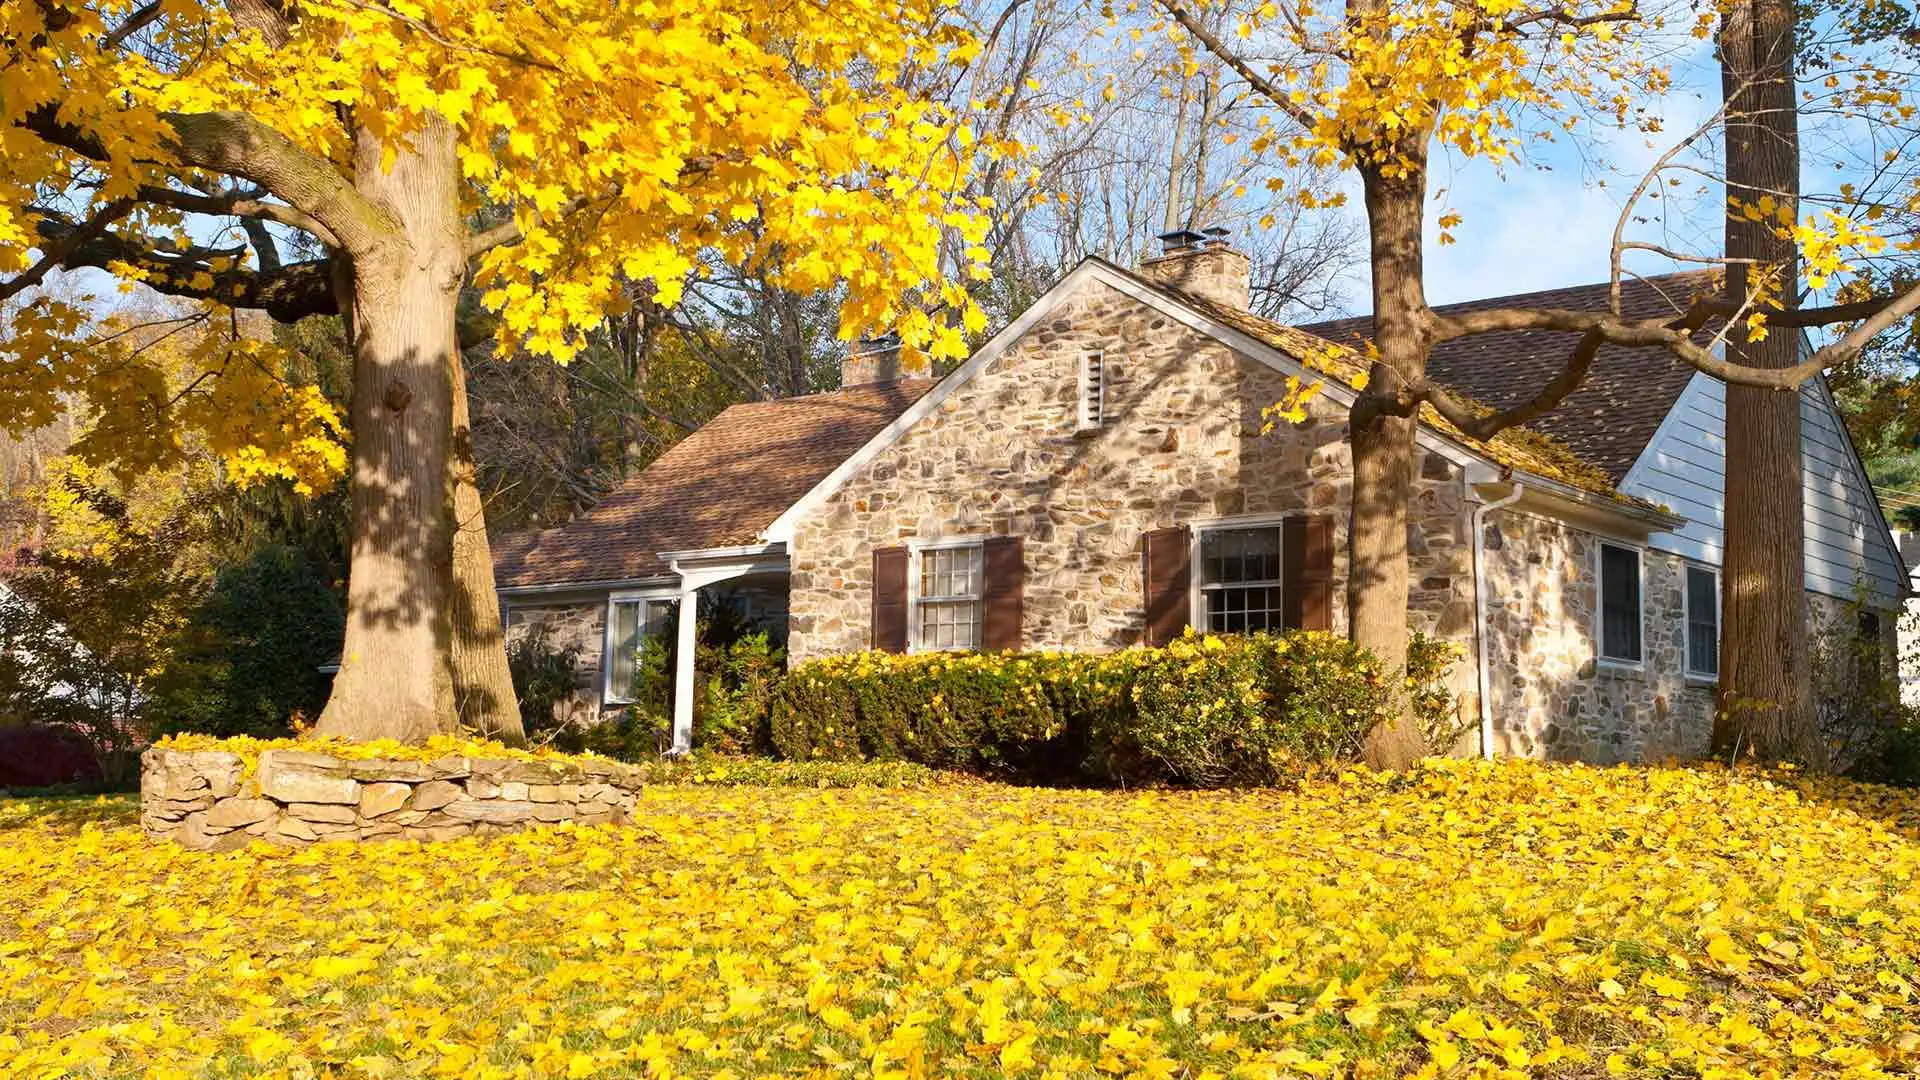 A home in Macomb, MI covered in fall leaves.